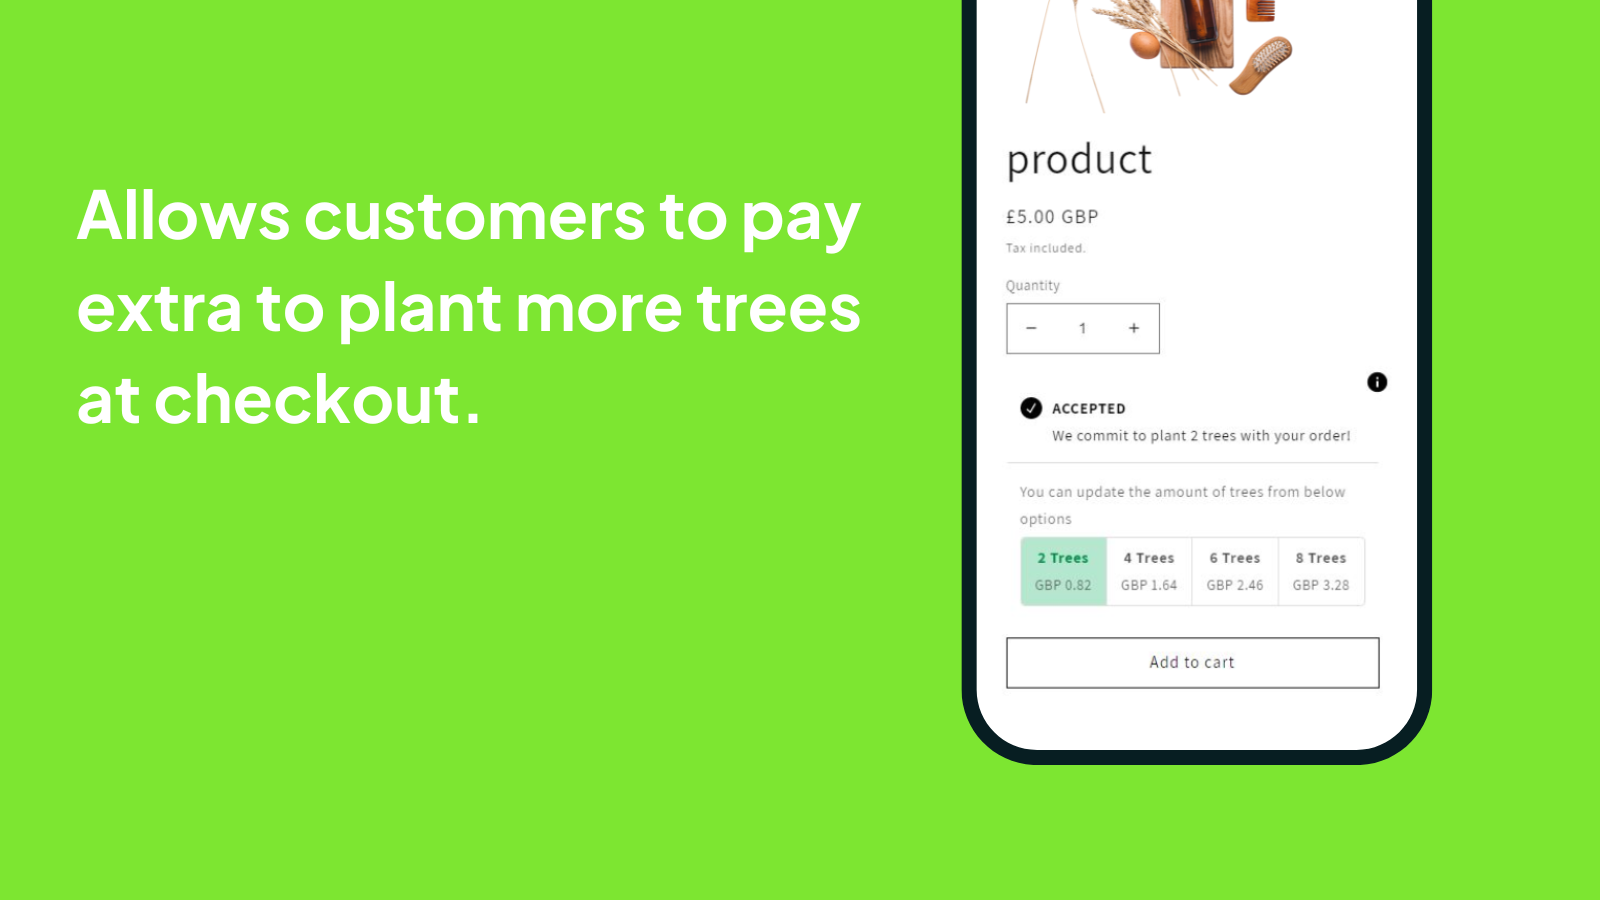 Allow customers to plant more trees